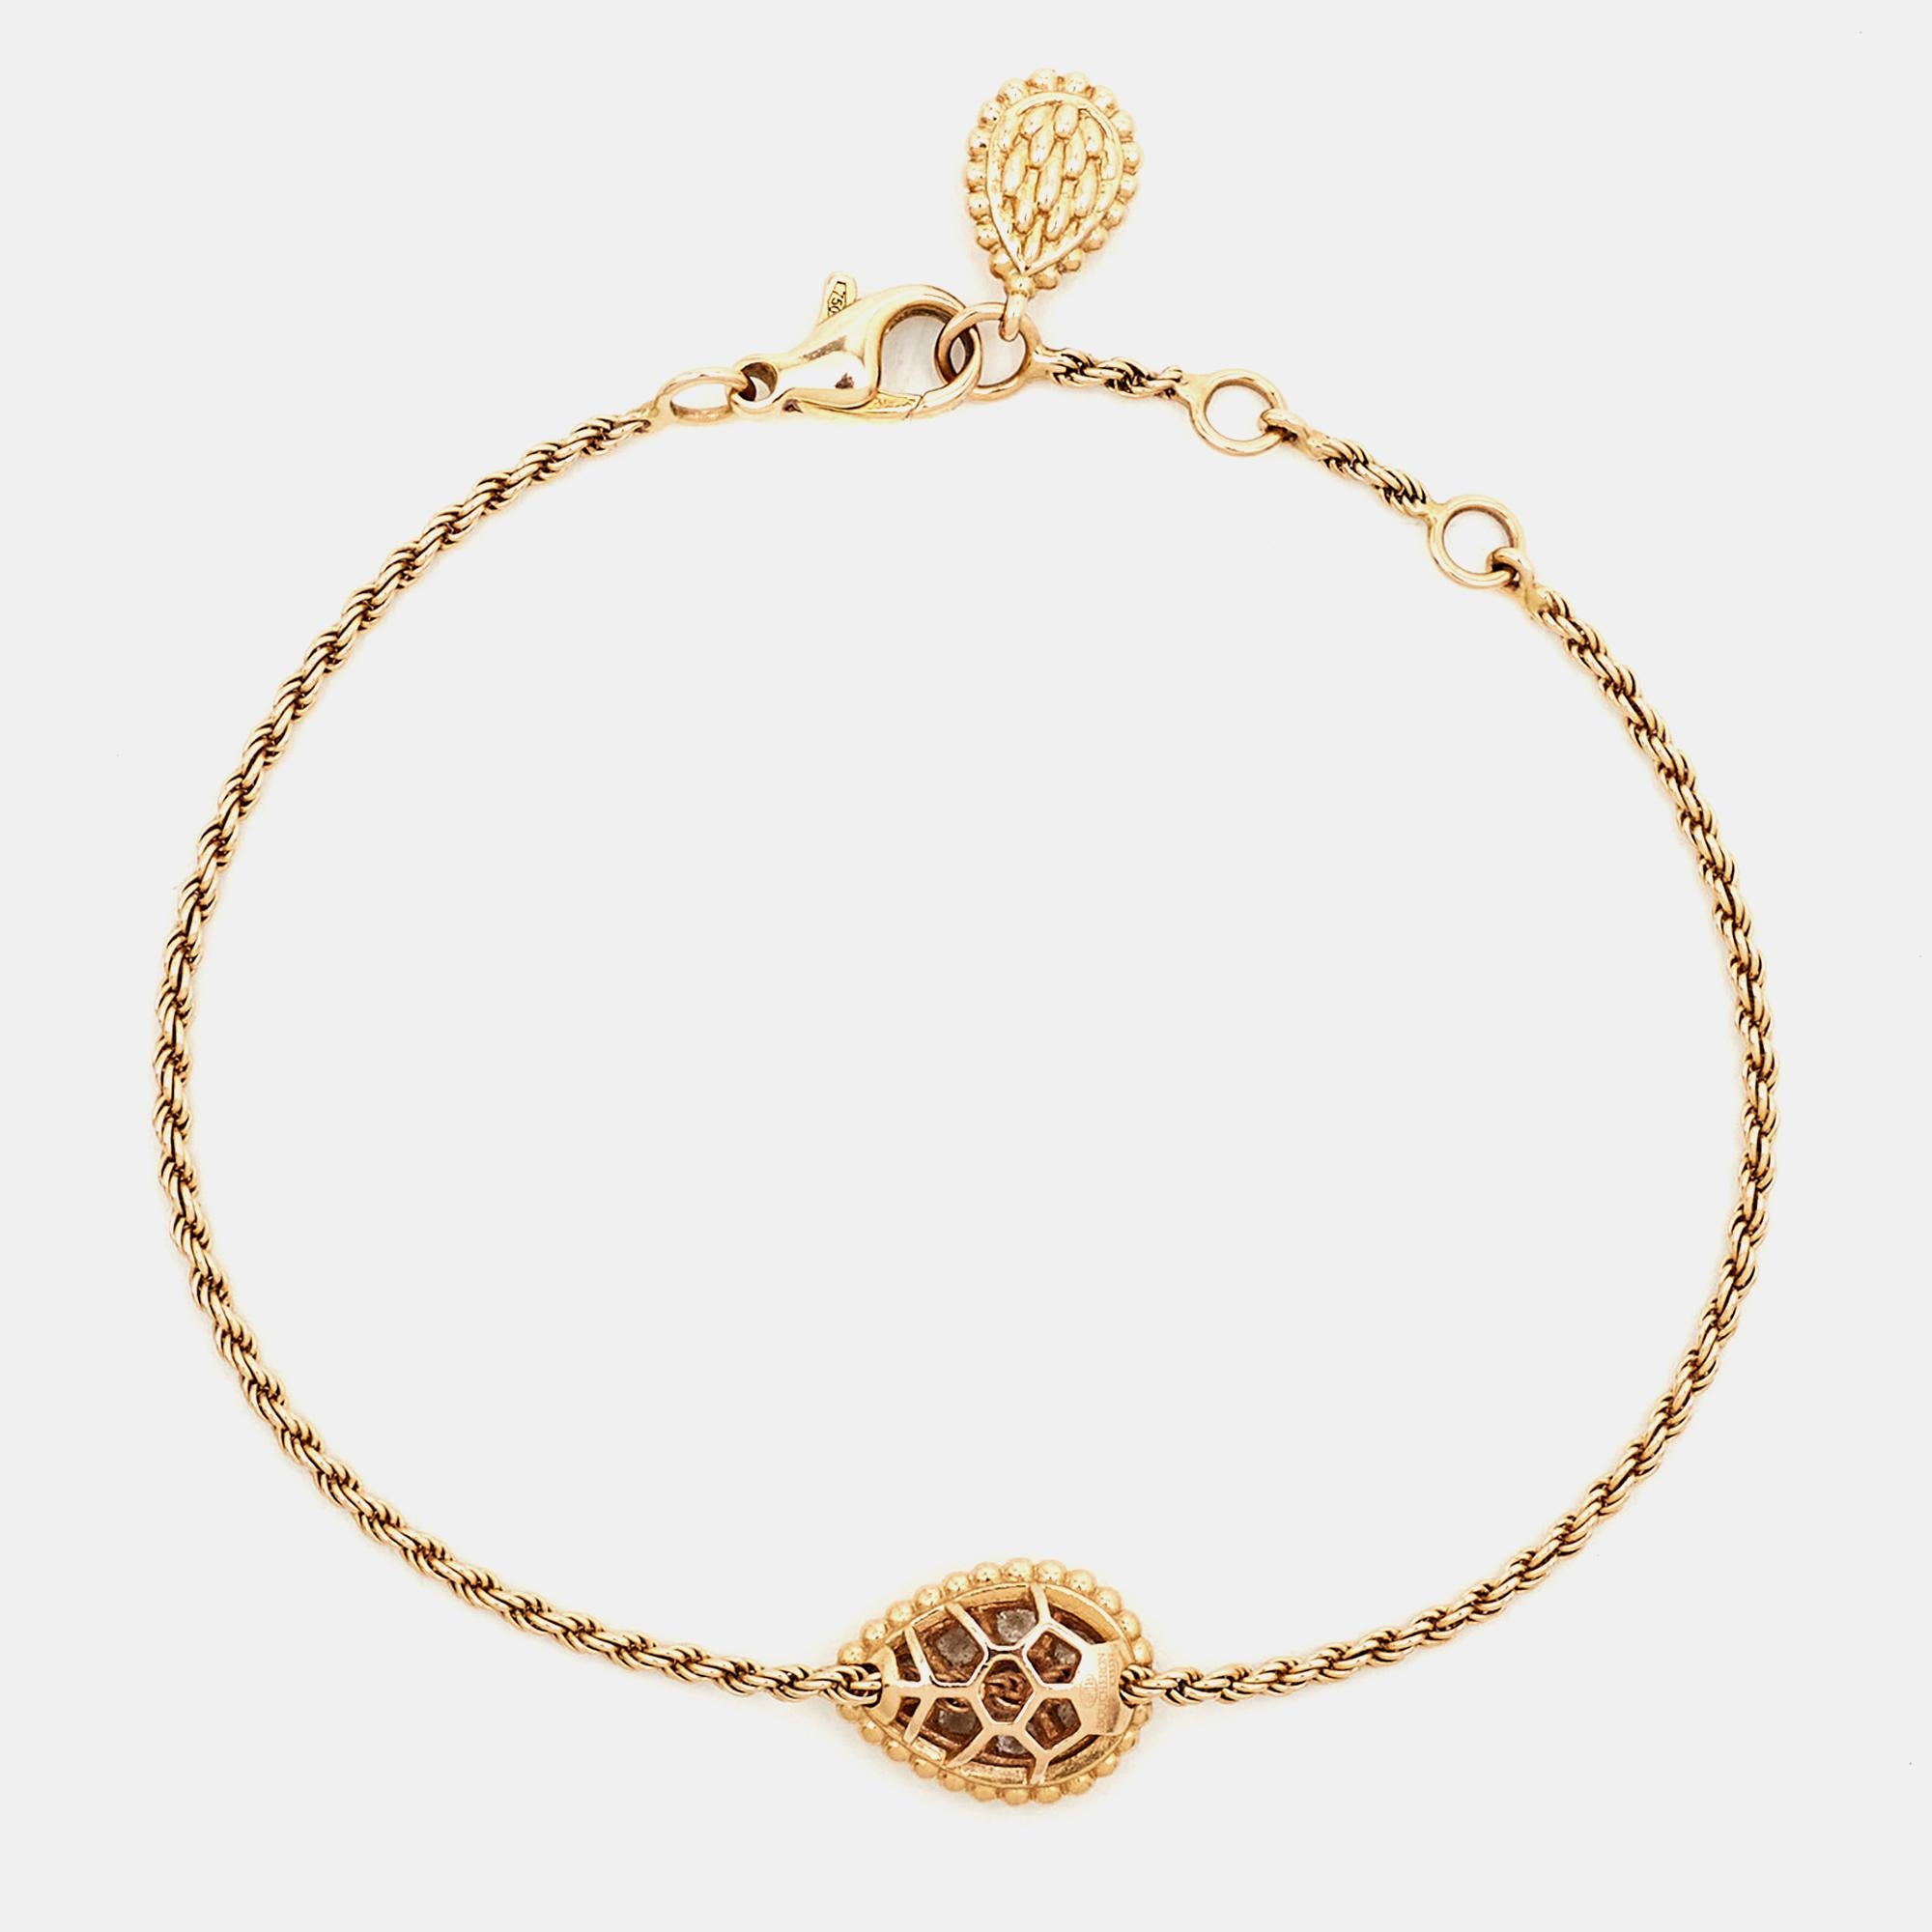 The Boucheron bracelet is a mesmerizing piece of jewelry that exudes elegance and charm. Crafted from luxurious 18k rose gold, the bracelet features a stunning serpent motif adorned with dazzling diamonds. The intricate design and exquisite